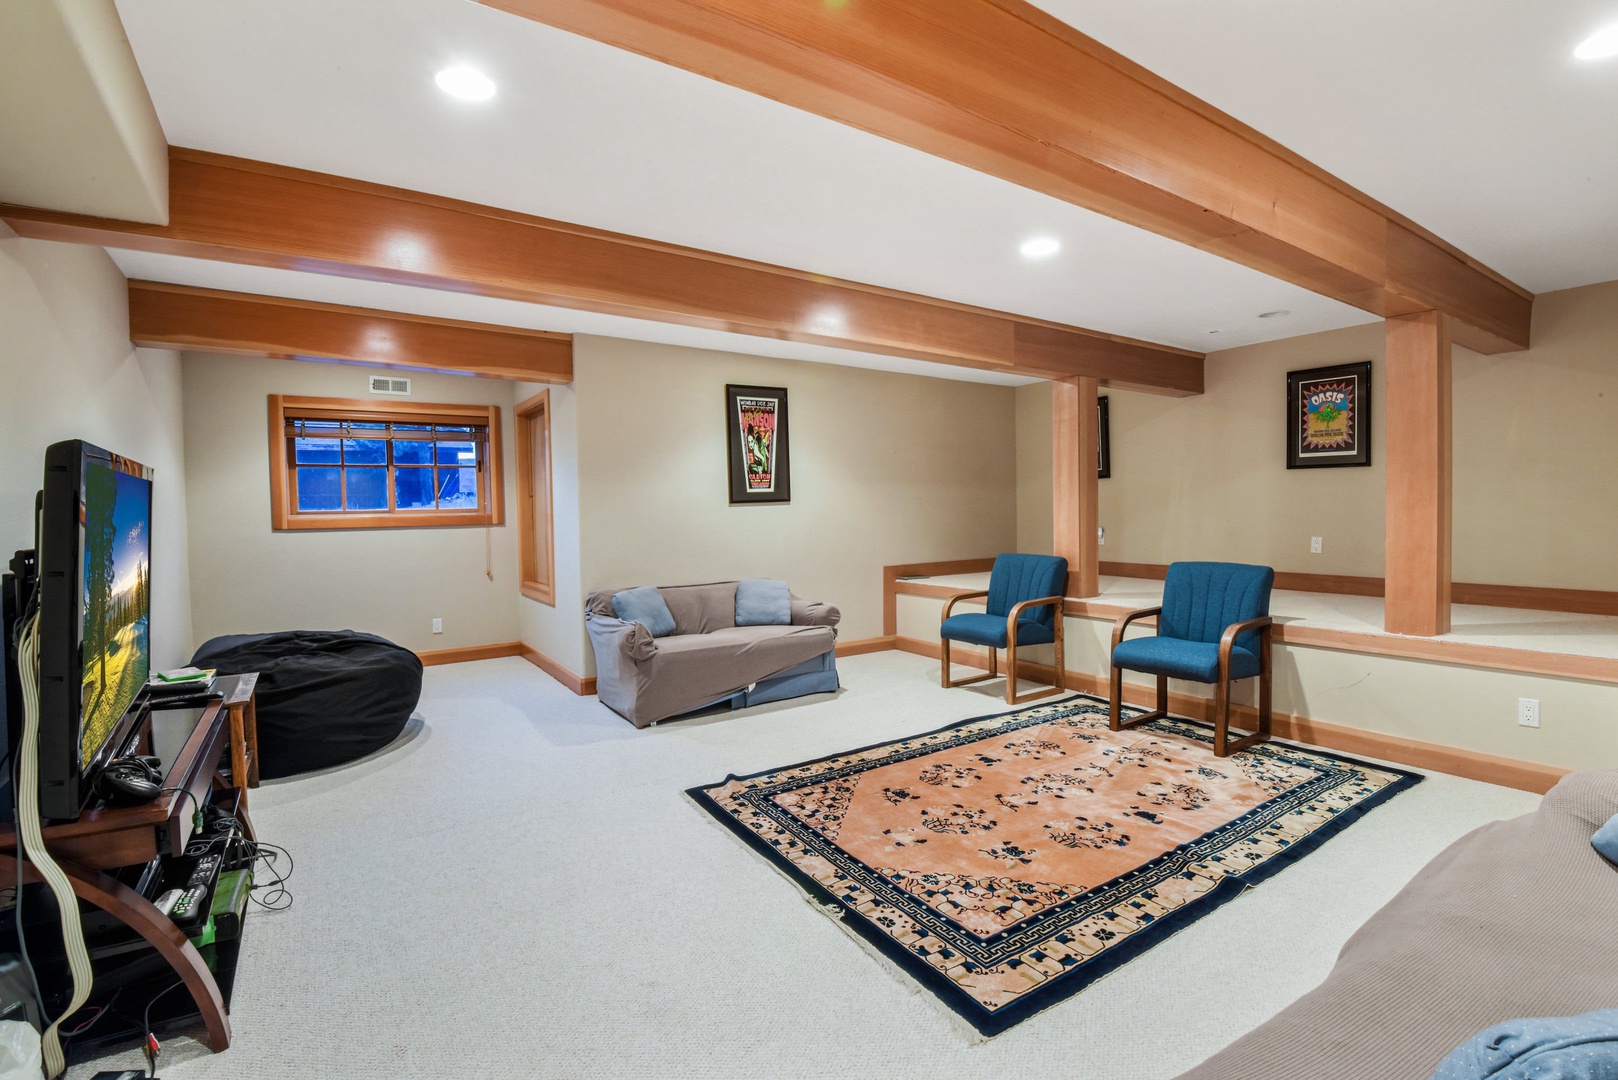 Basement family room with TV, DVD player